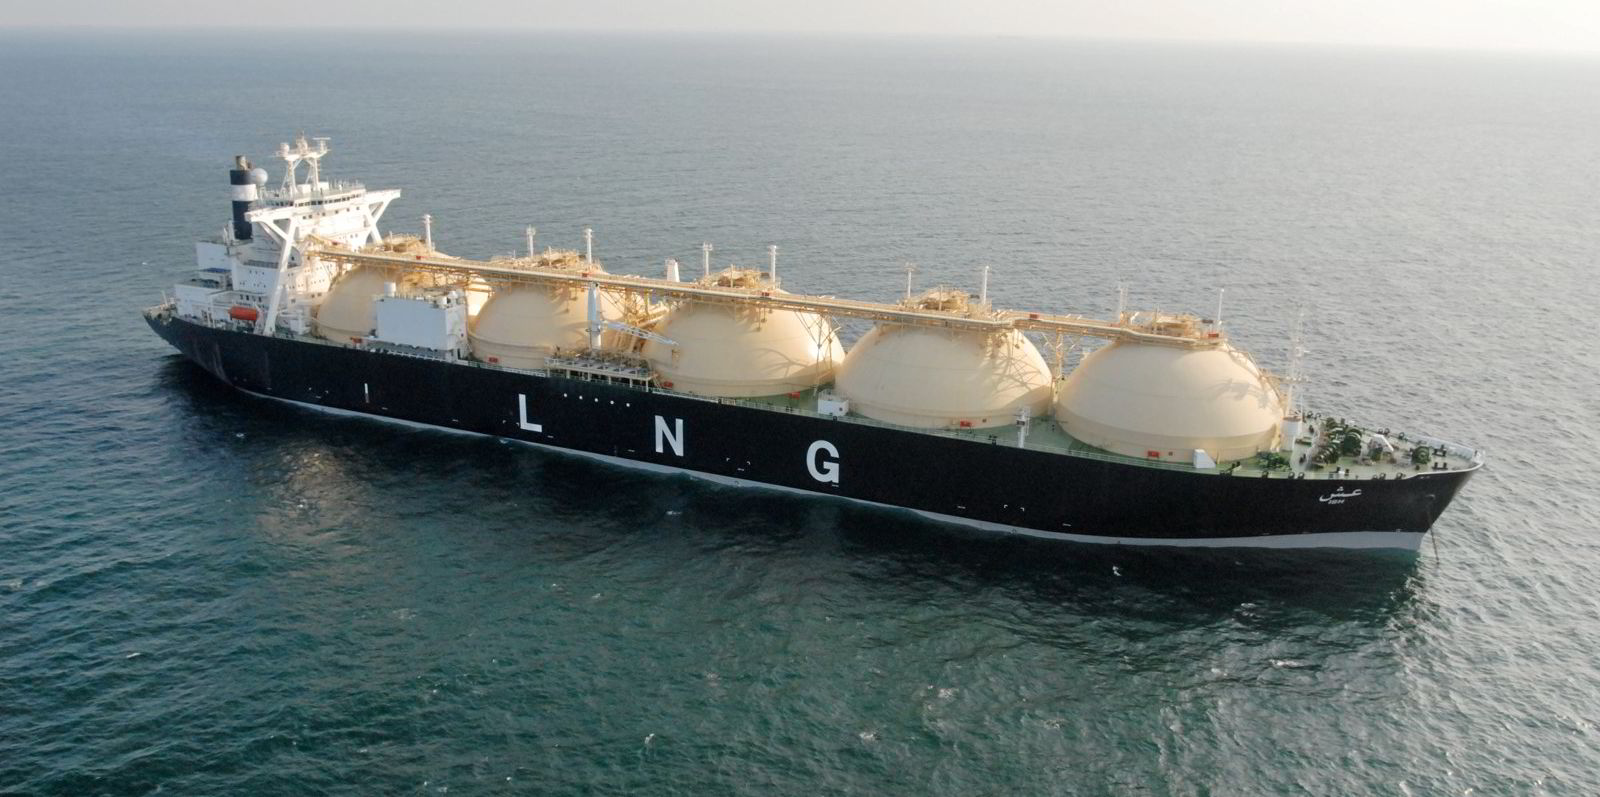 Reality bites': LNG executives agree Europe must change approach to imports  | Upstream Online